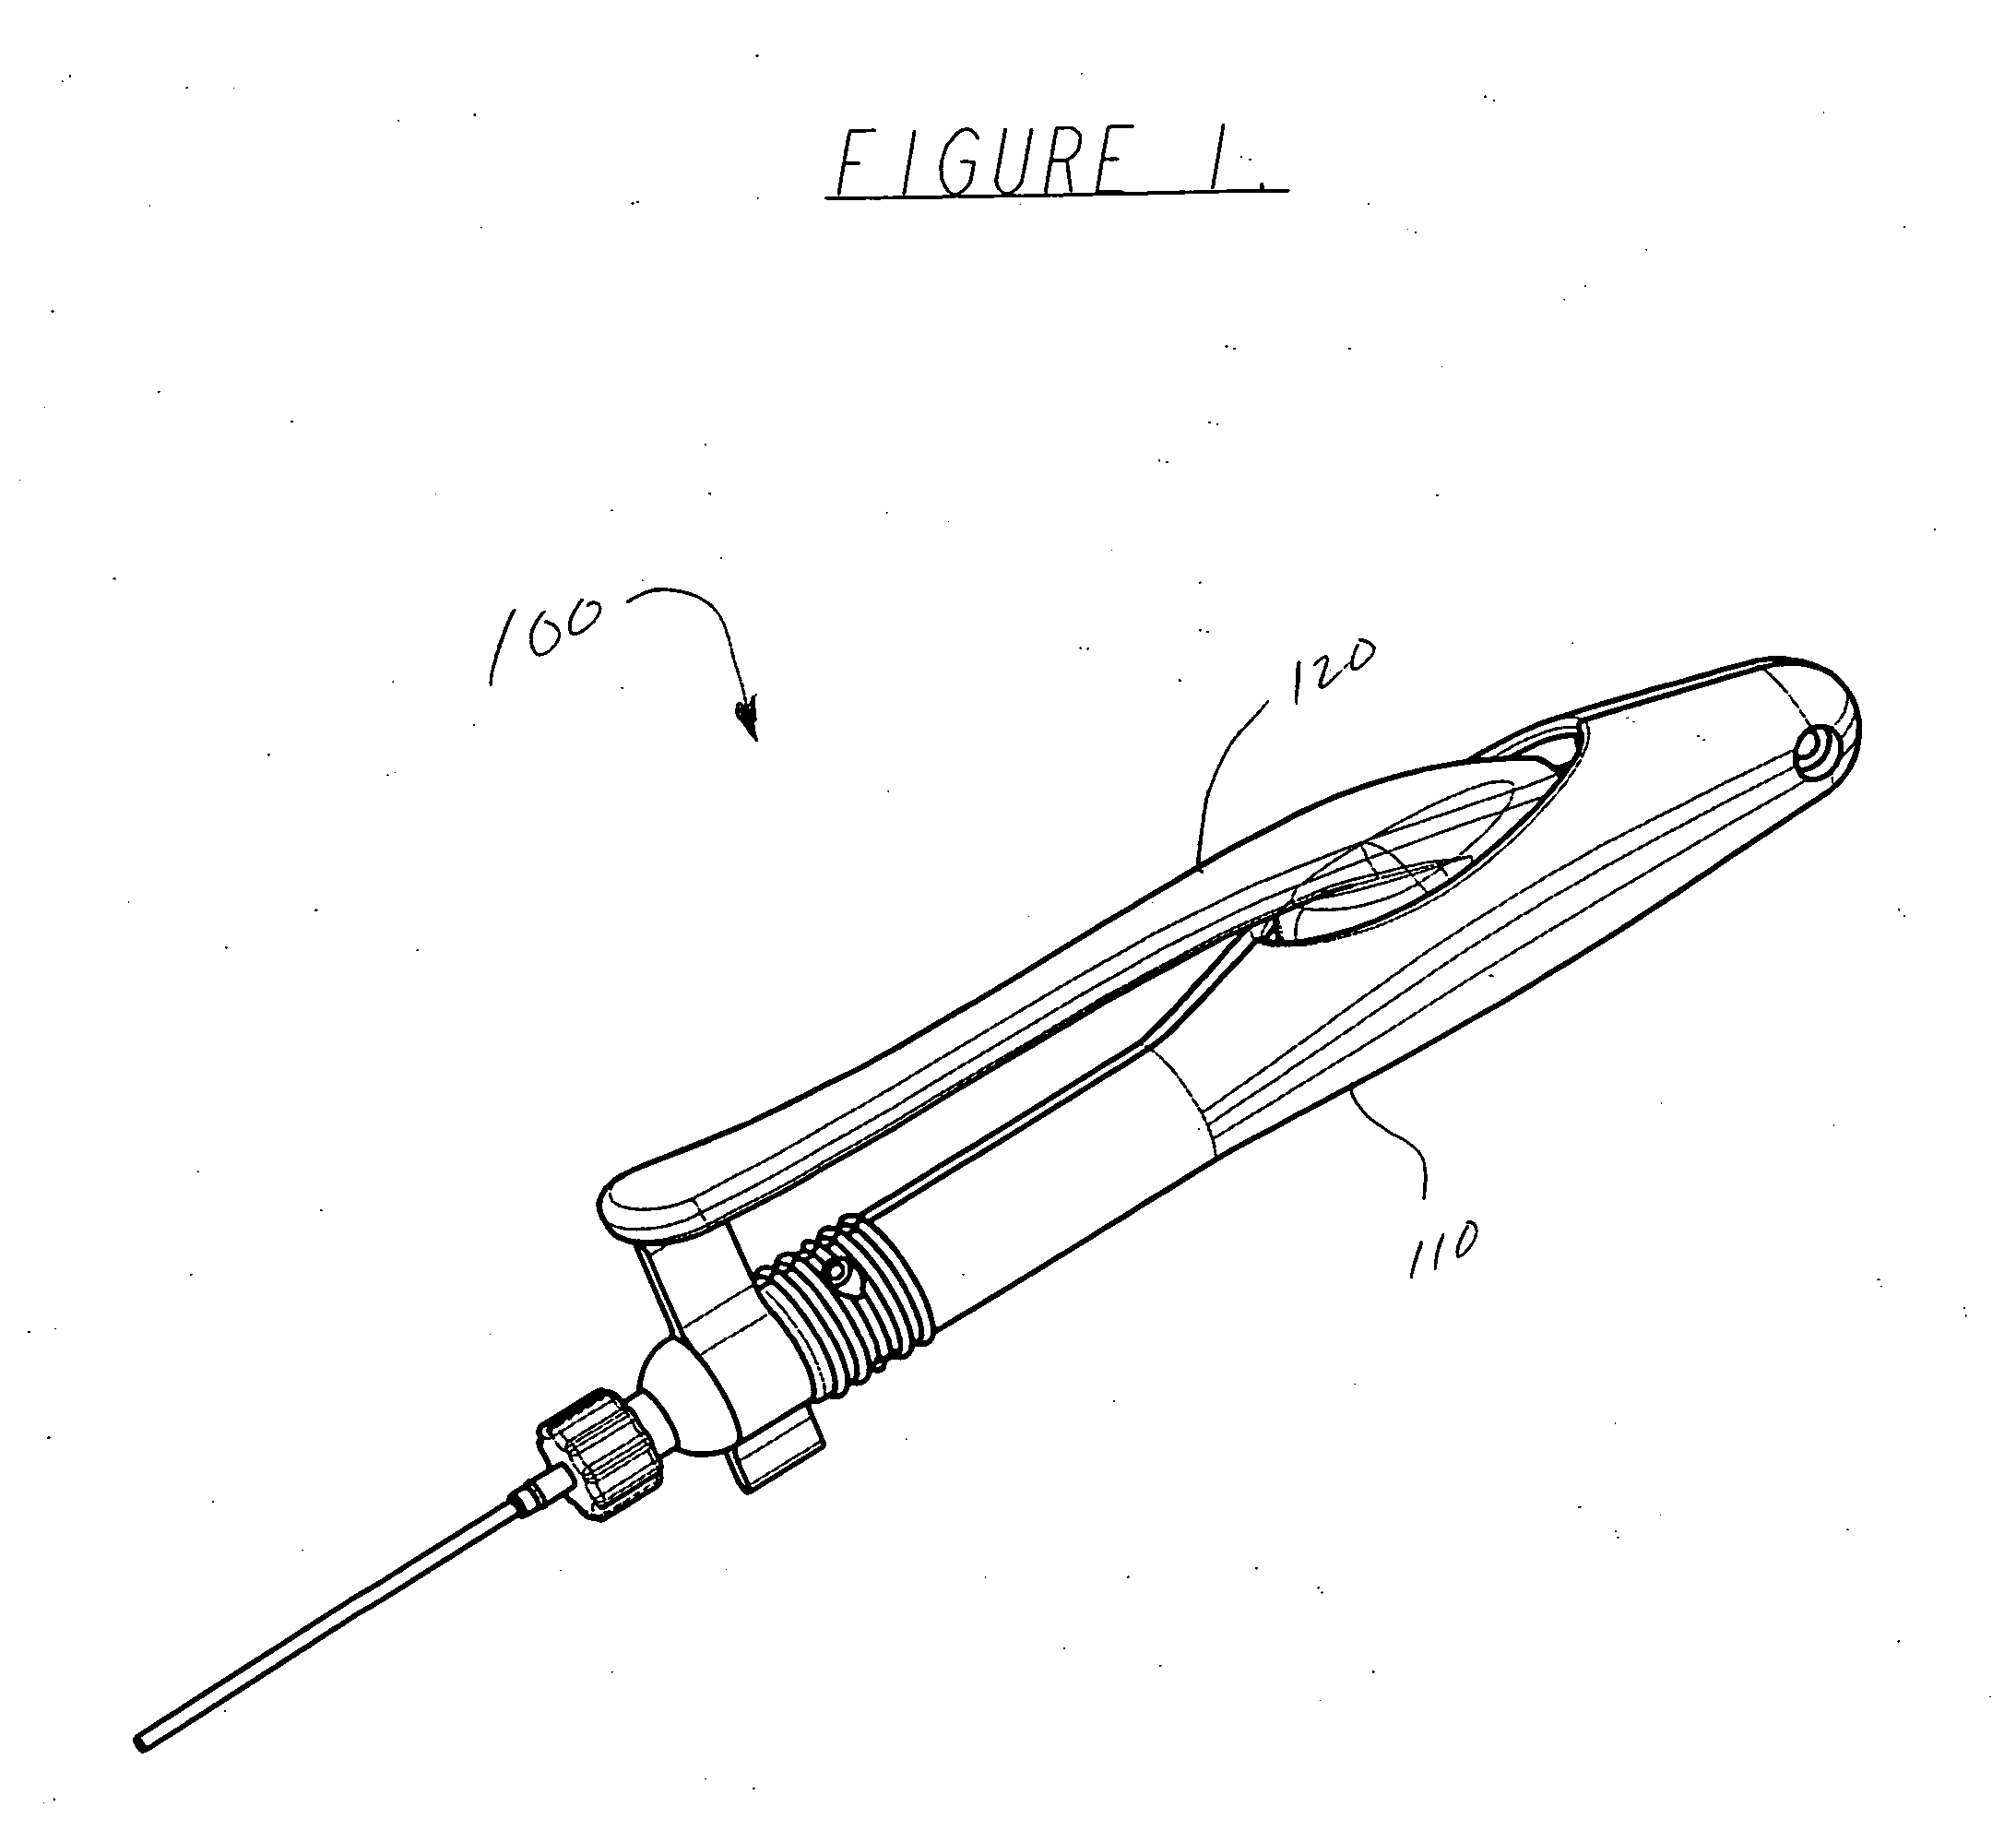 Applicators, dispensers and methods for mixing, dispensing and applying adhesive or sealant material and another material